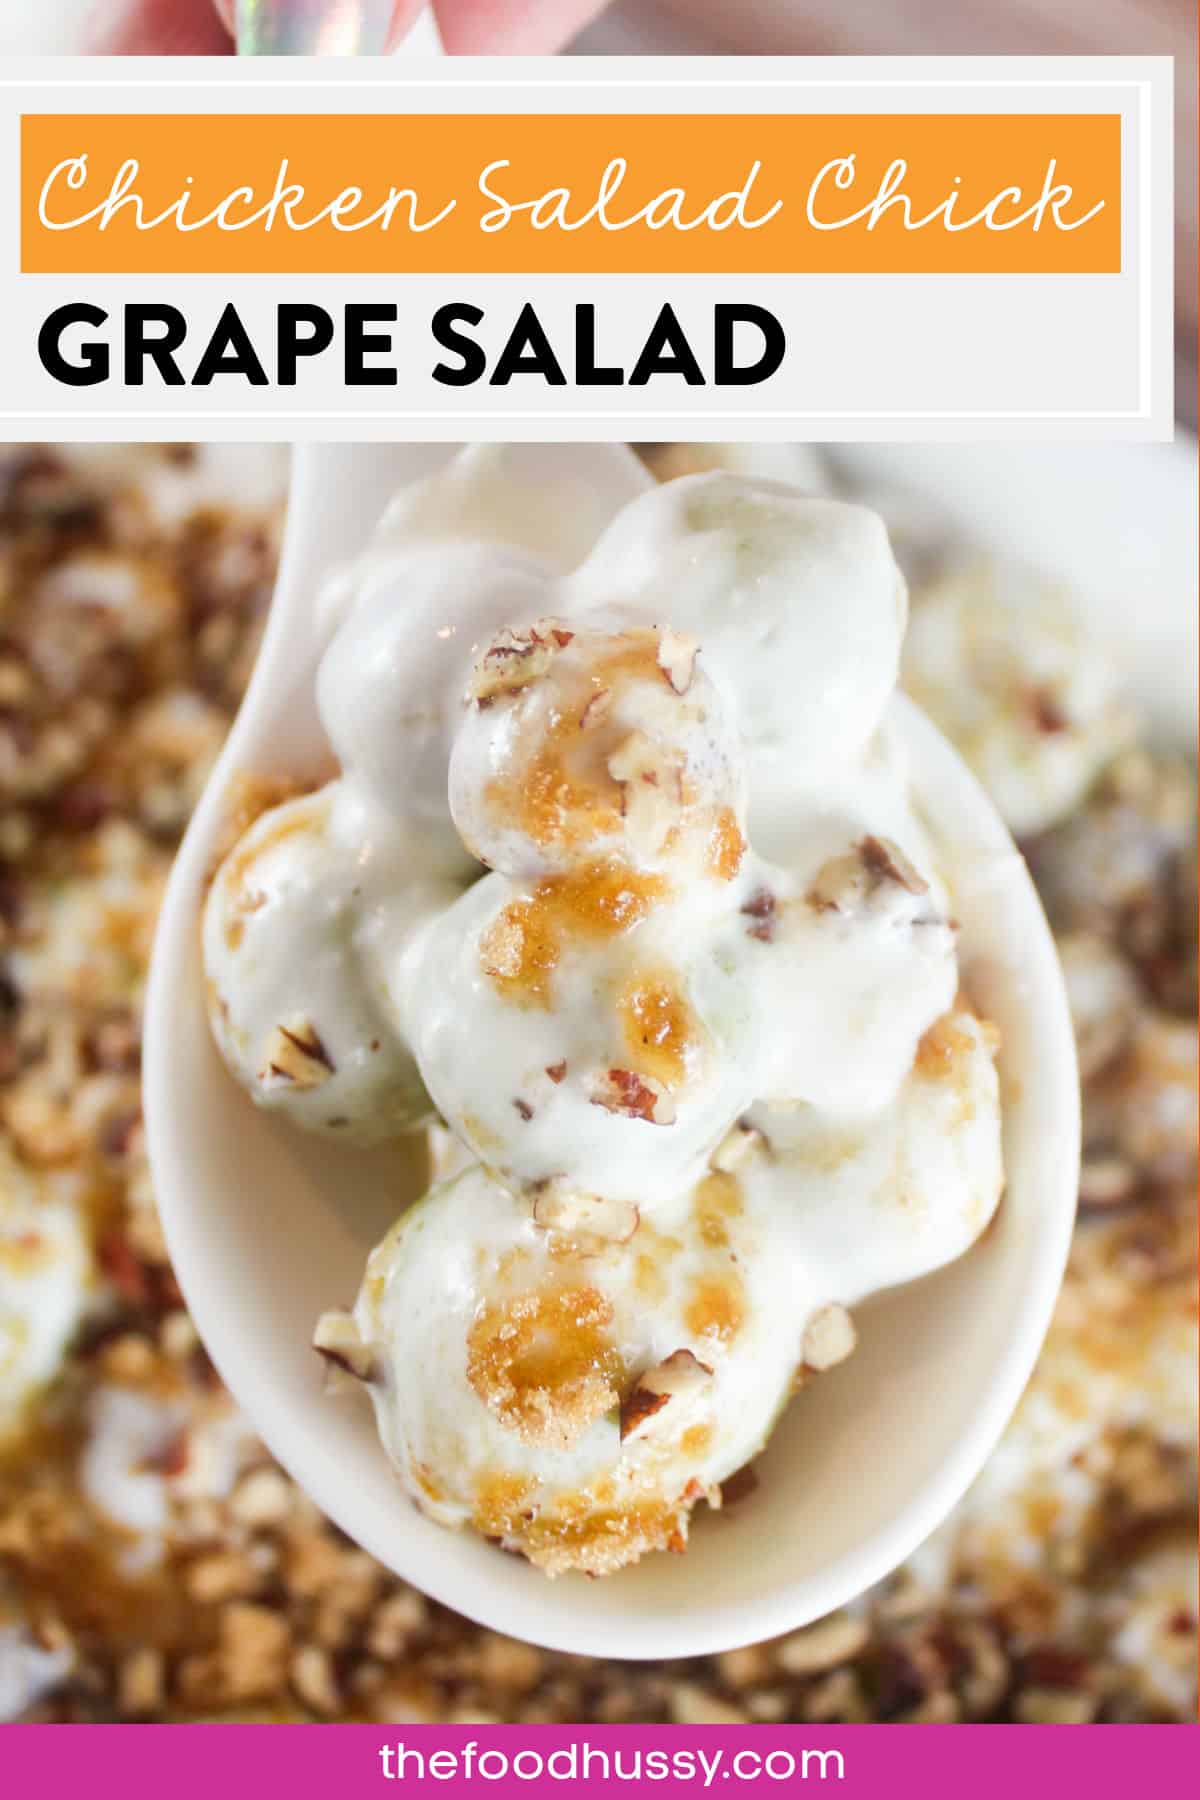 Chicken Salad Chick Grape Salad is the perfect potluck dessert! It's fruity and refreshing with a little crunch and a little sweet! A dish everyone will love! via @foodhussy